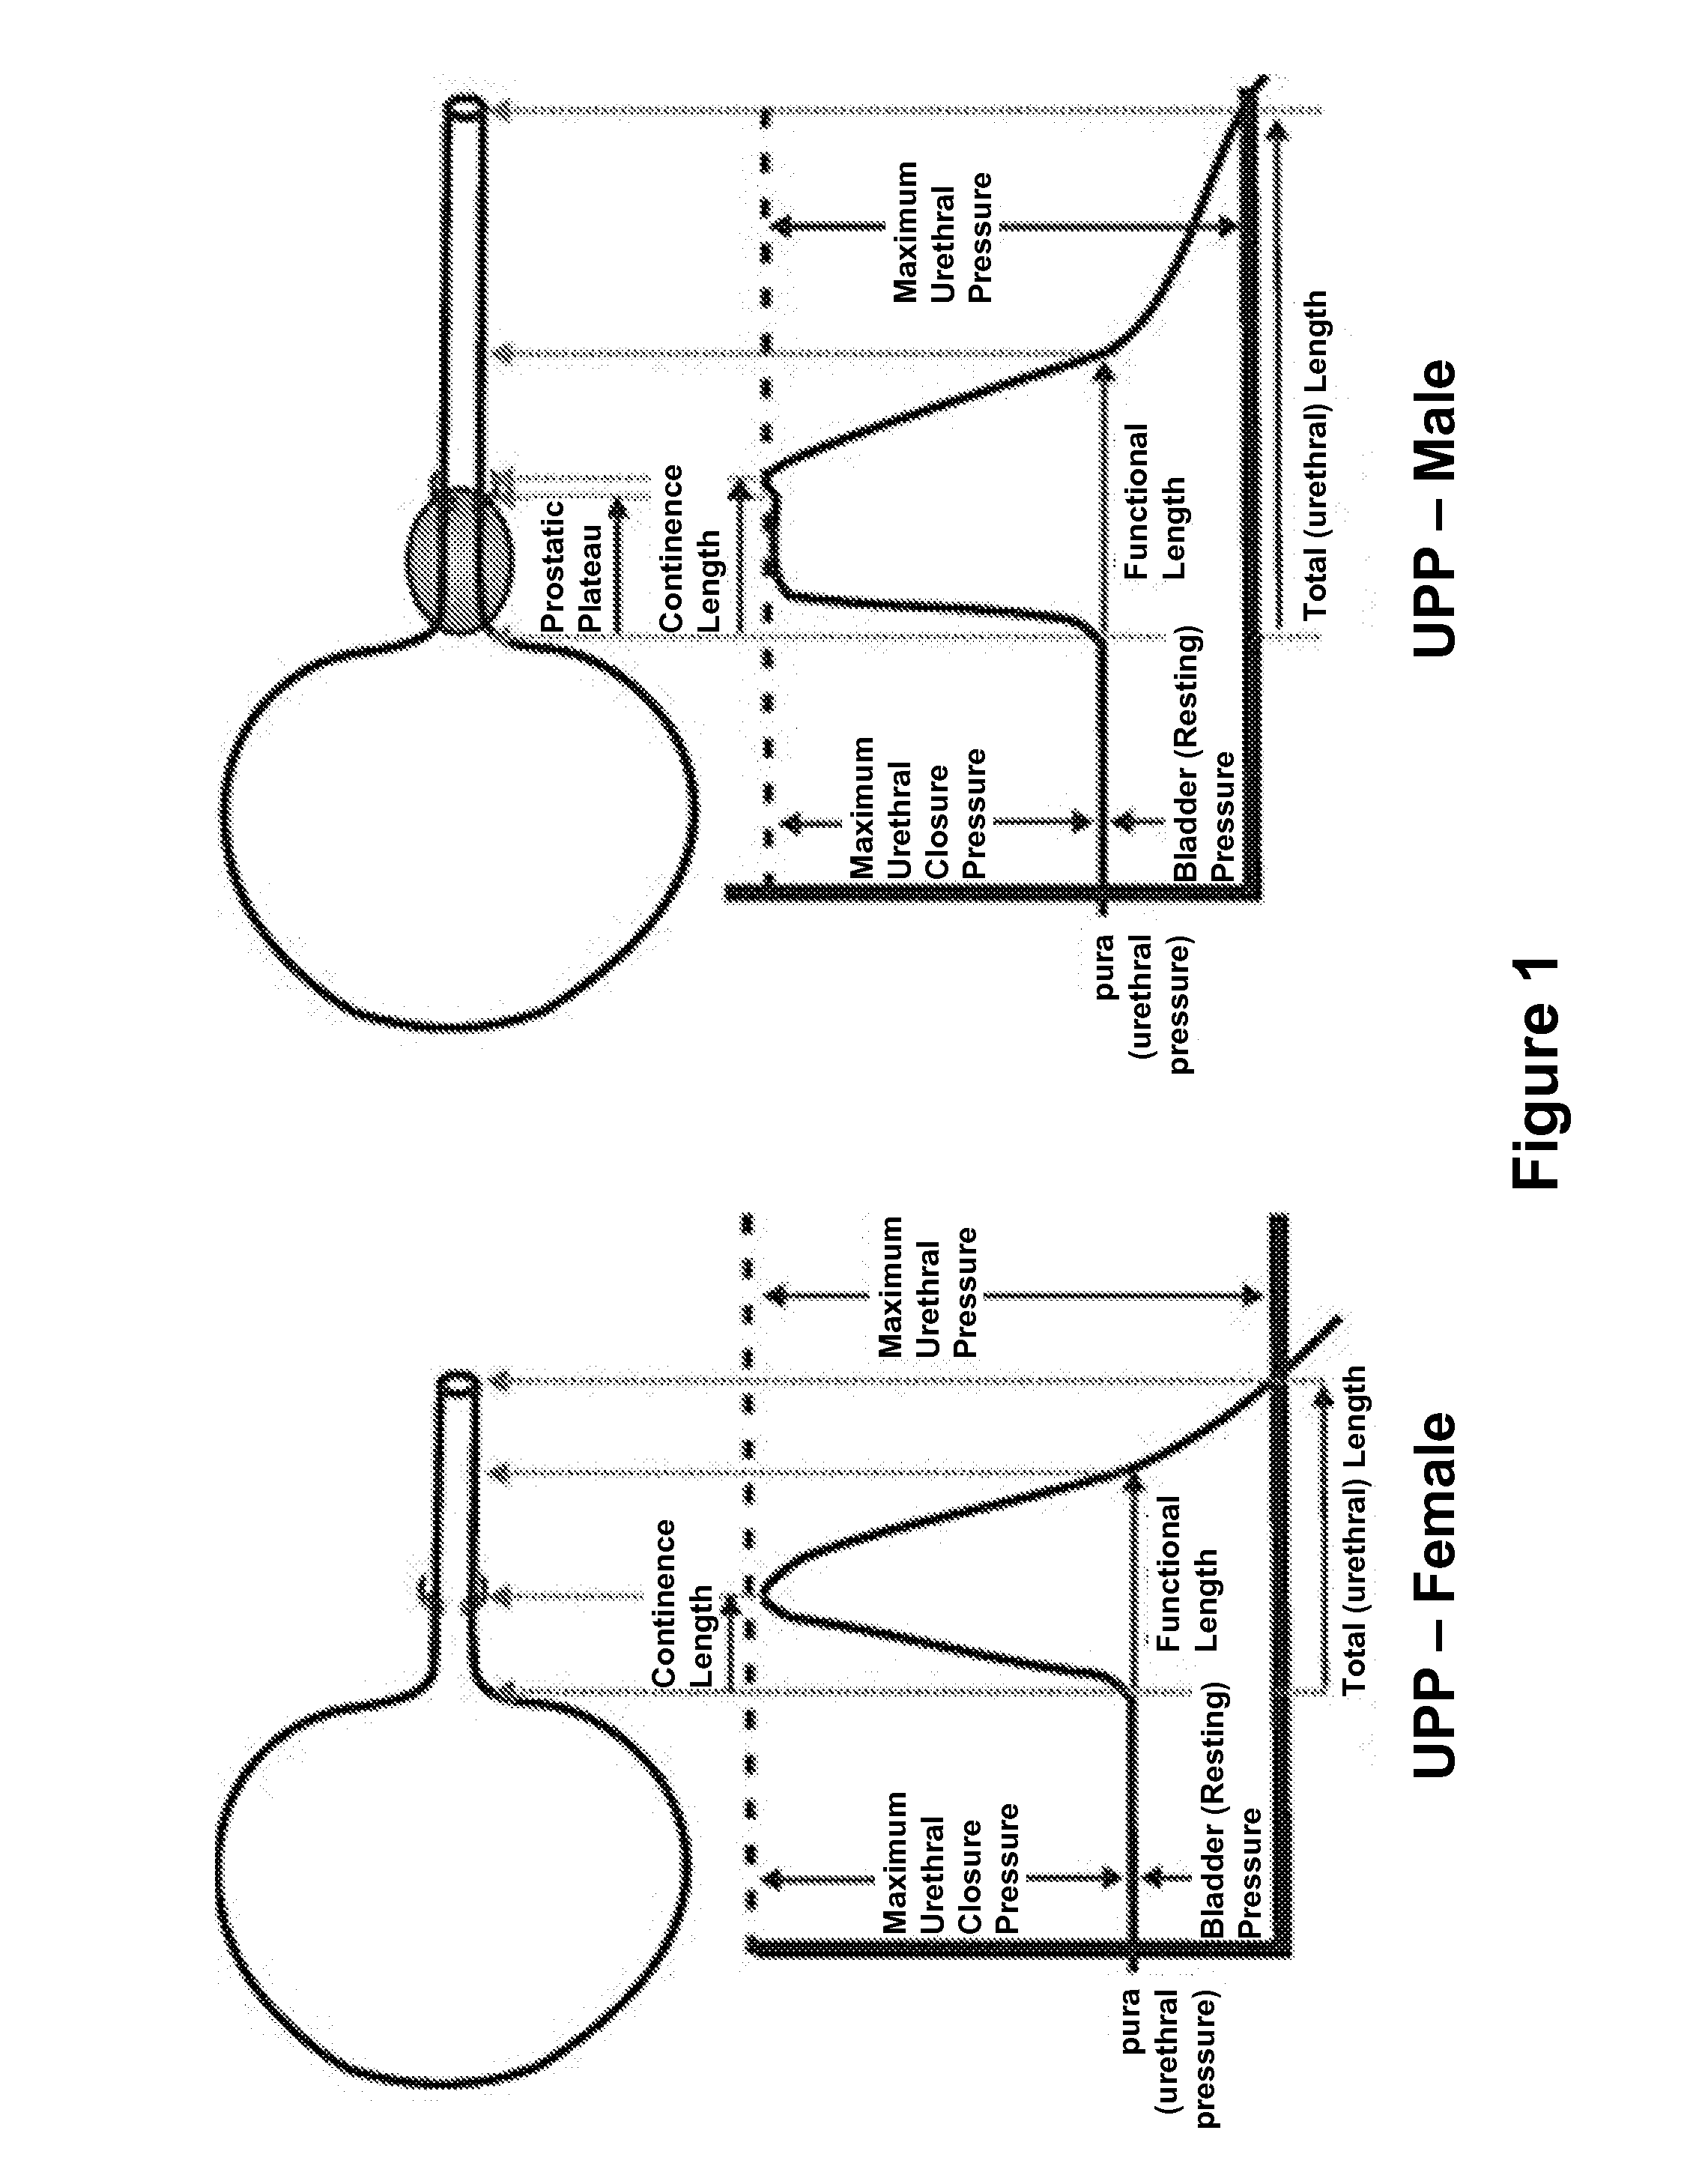 Device and method for measuring pressure exerted on a surface